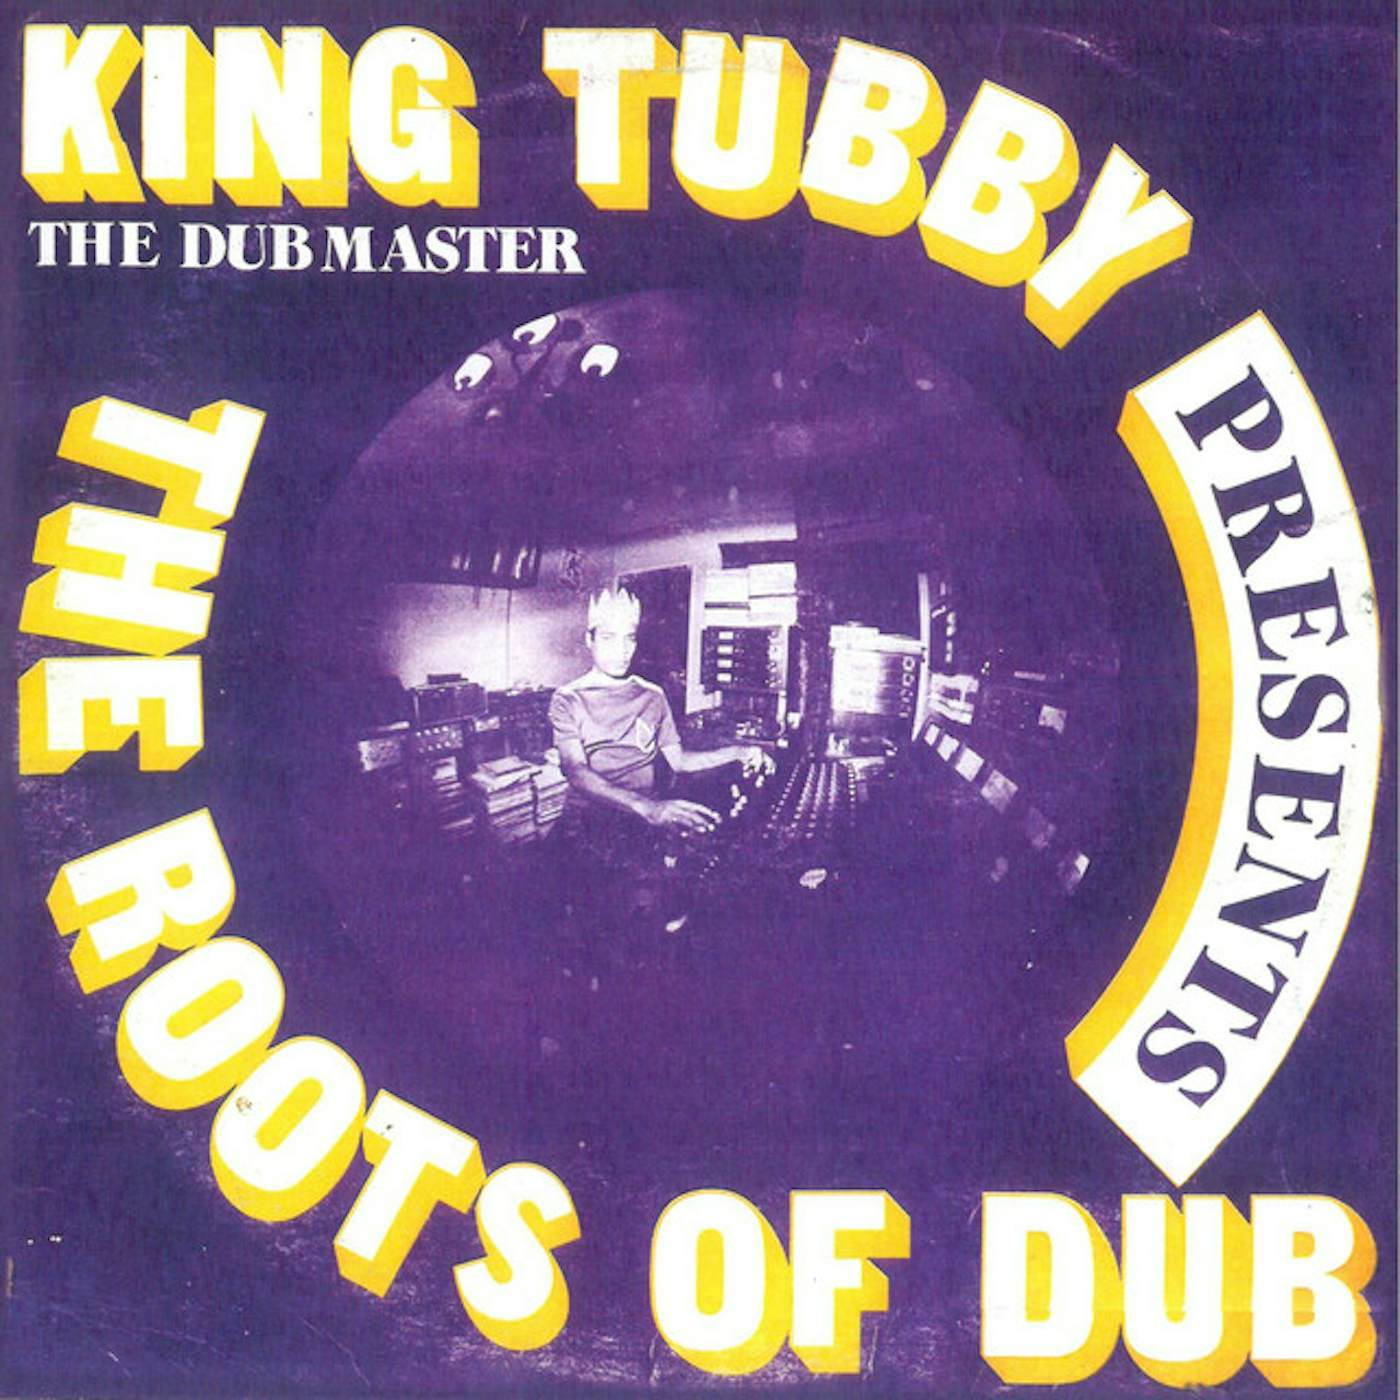 King Tubby ROOTS OF DUB Vinyl Record